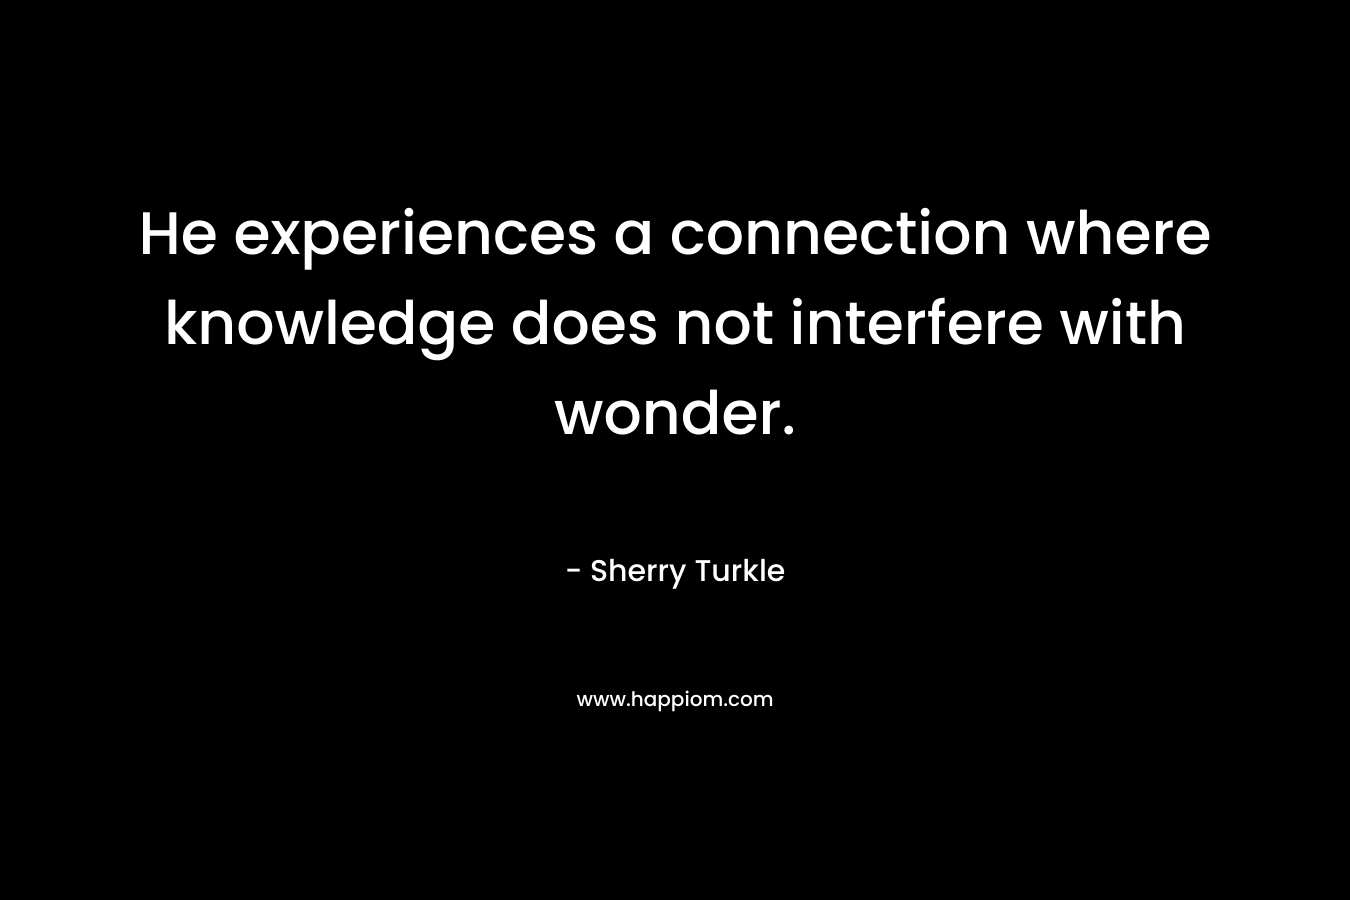 He experiences a connection where knowledge does not interfere with wonder.